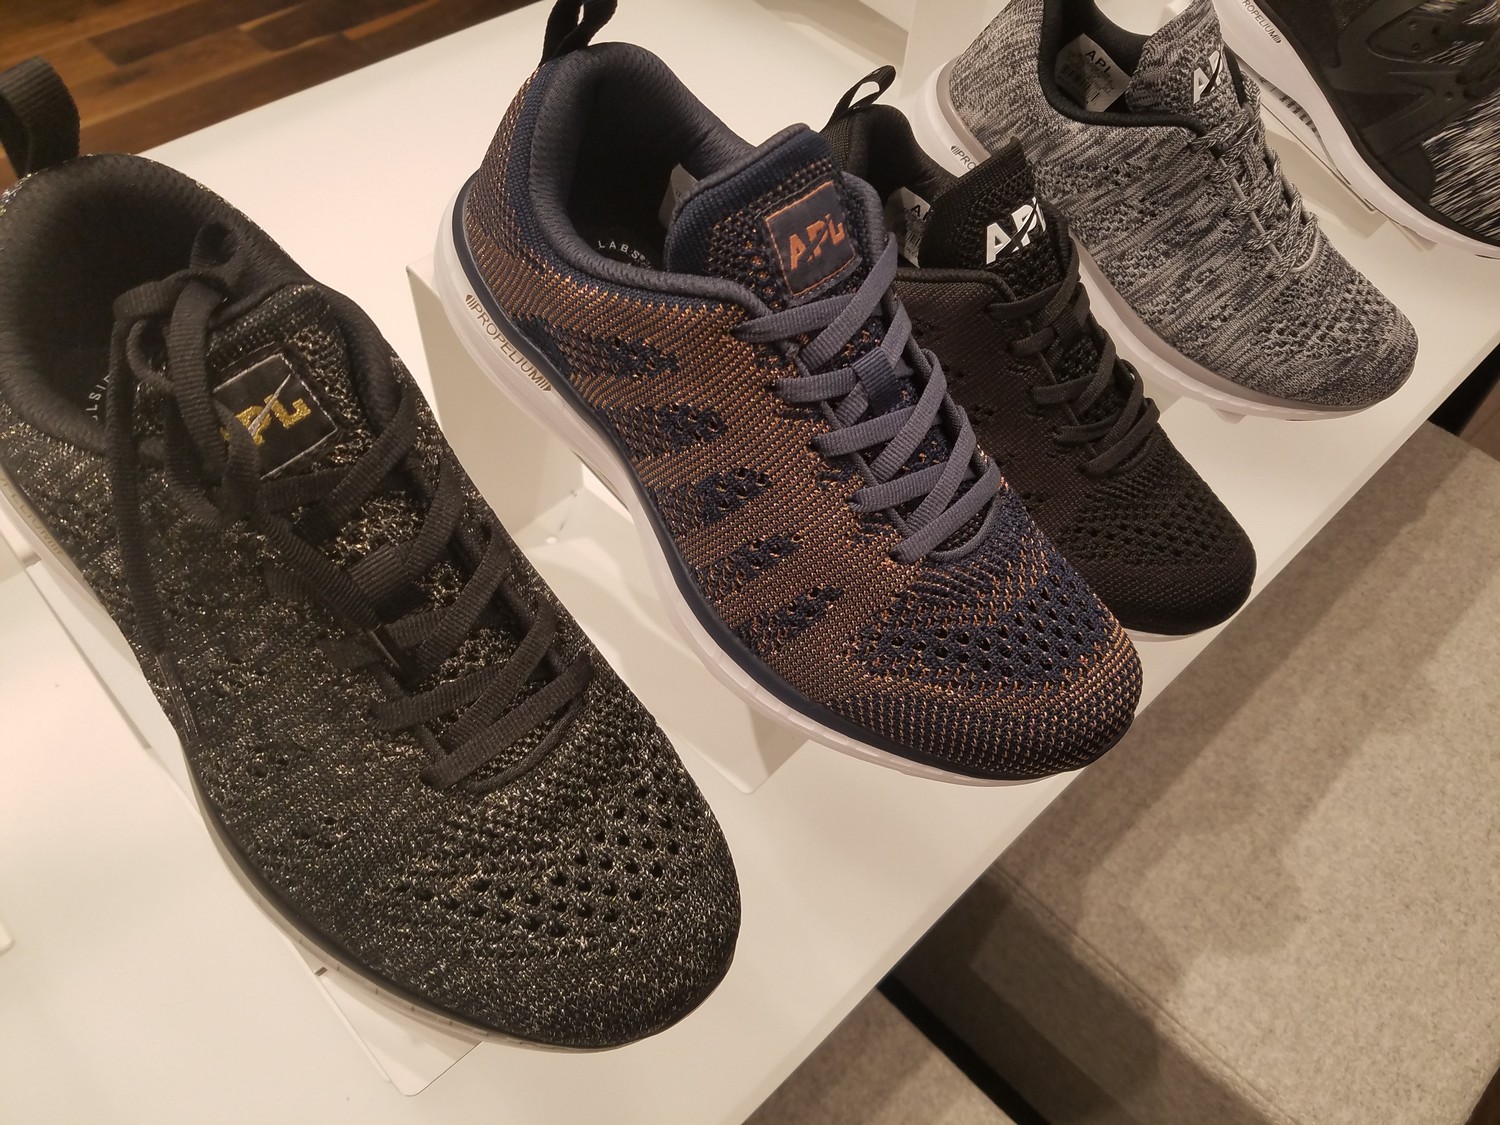 lululemon Partners with APL to Offer Athletic Shoes In-Store